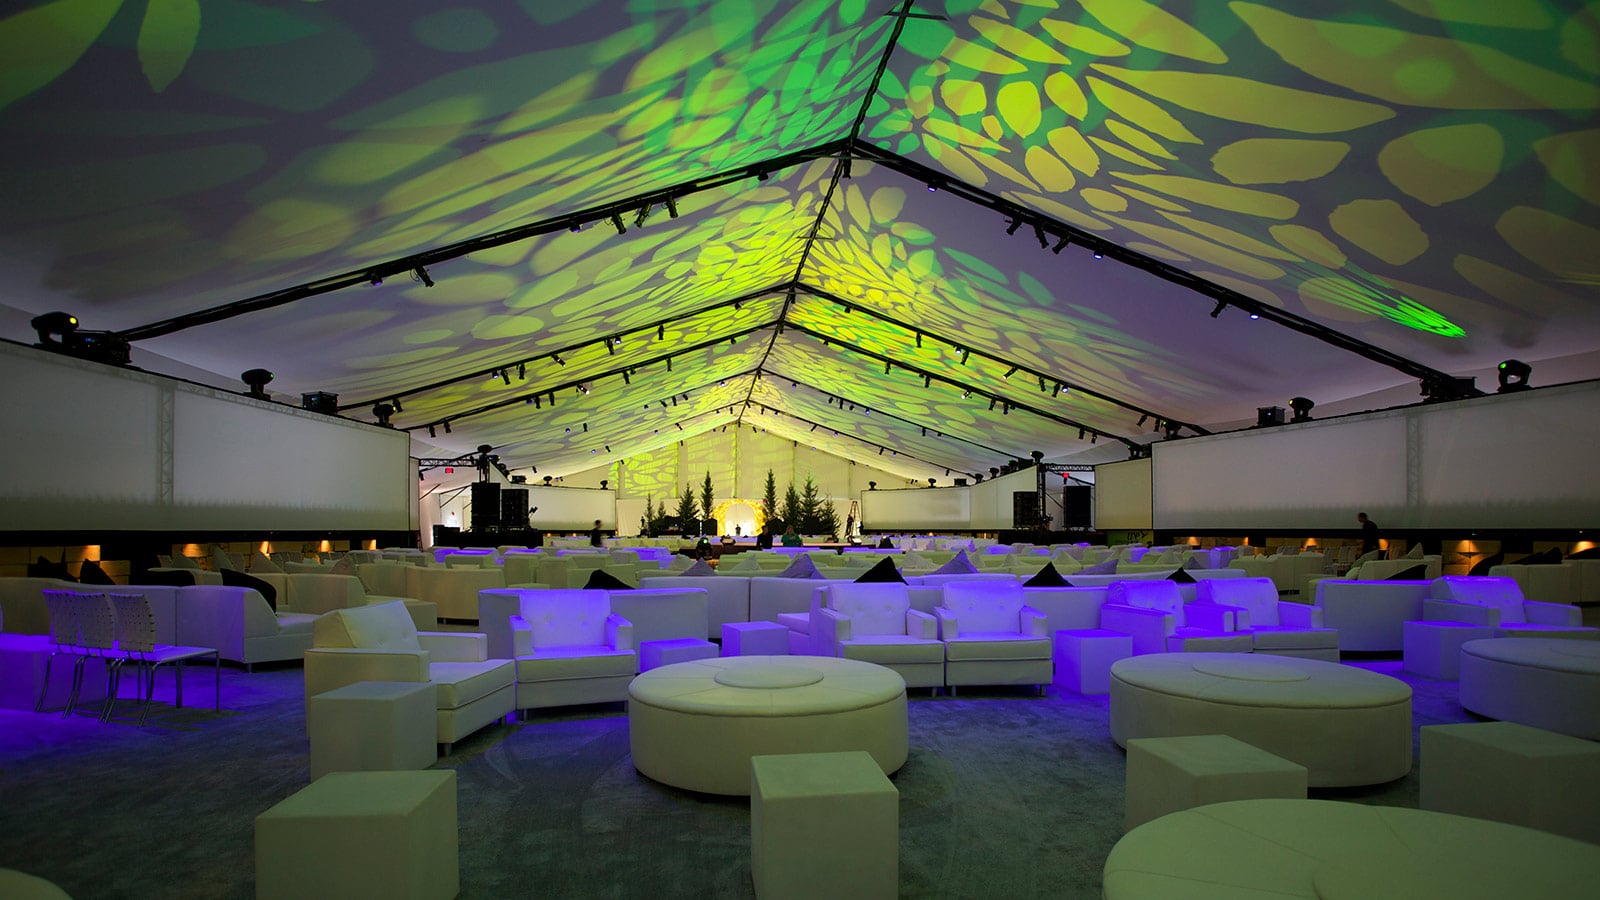 Tackling Audio in a Big Tent: Meyer Sound LYON Immerses VIPs at University of Oregon Fundraiser